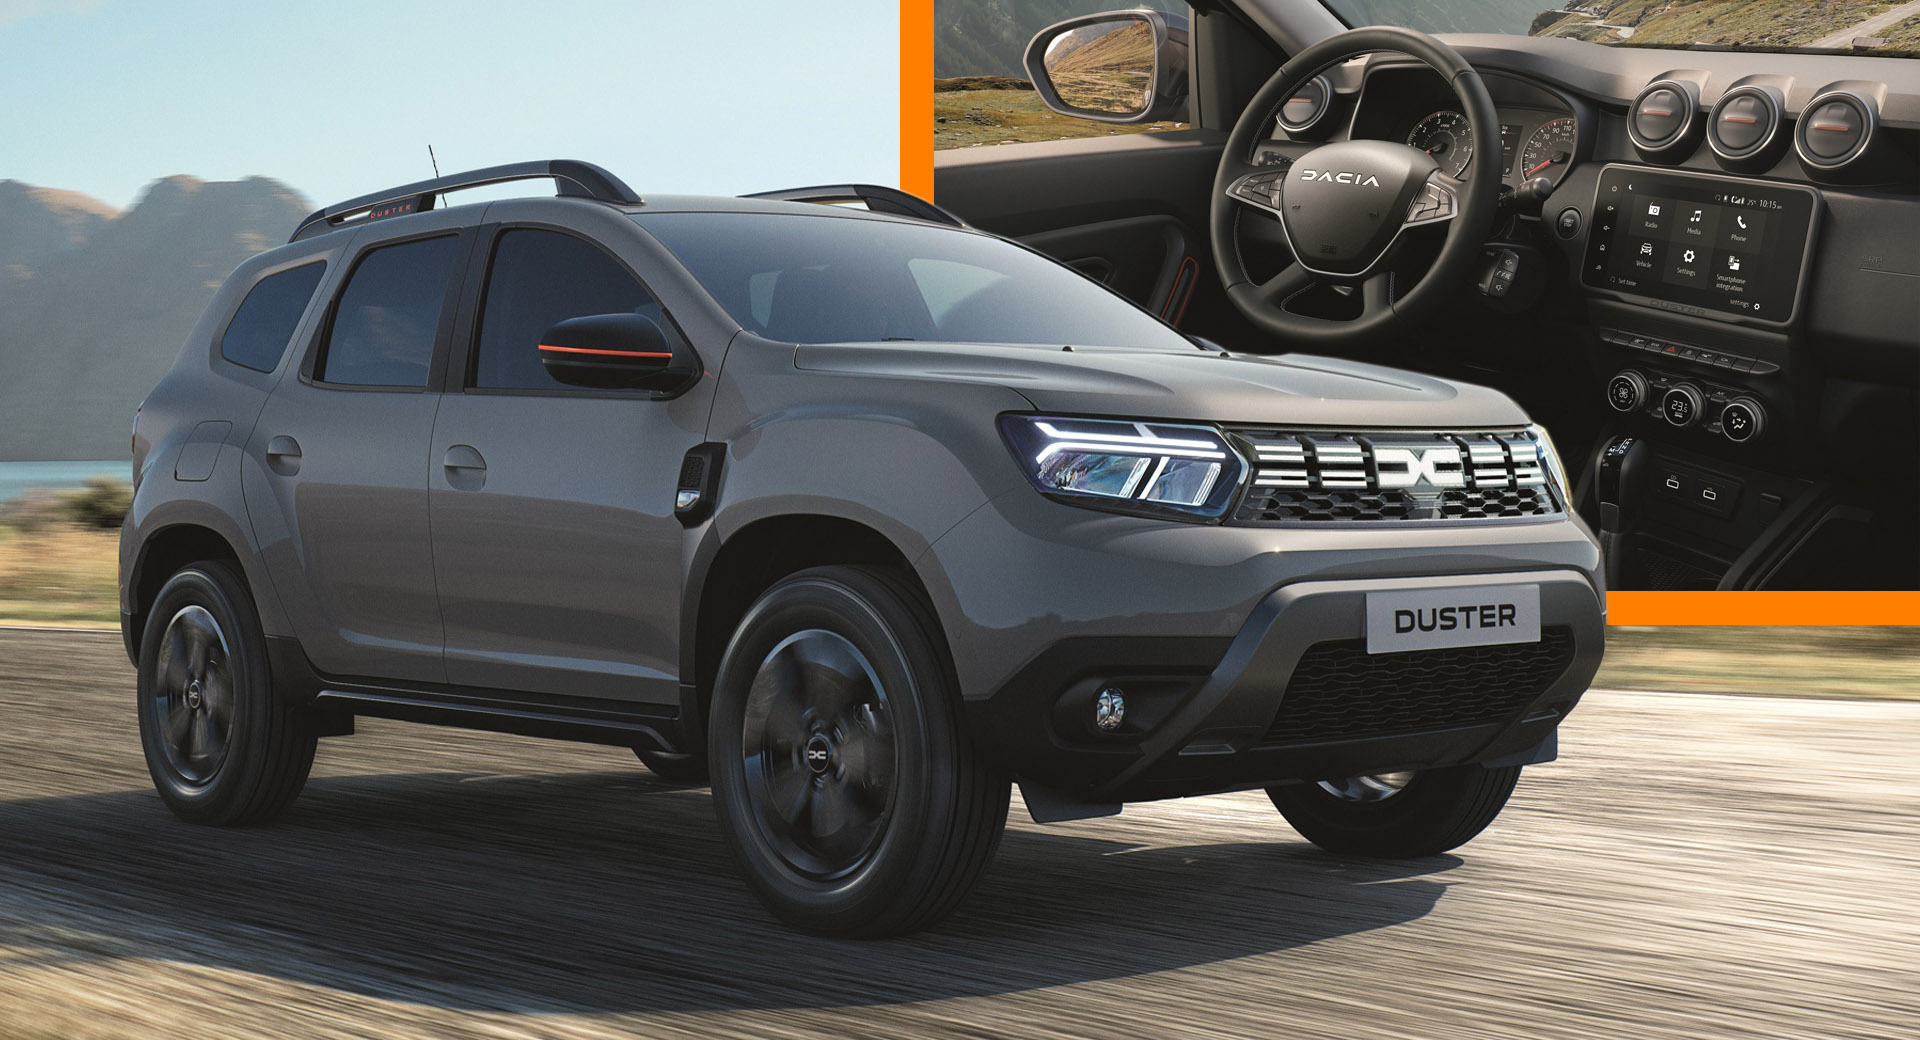 https://www.carscoops.com/wp-content/uploads/2022/11/2023-Dacia-Duster-Extreme-SE-main.jpg